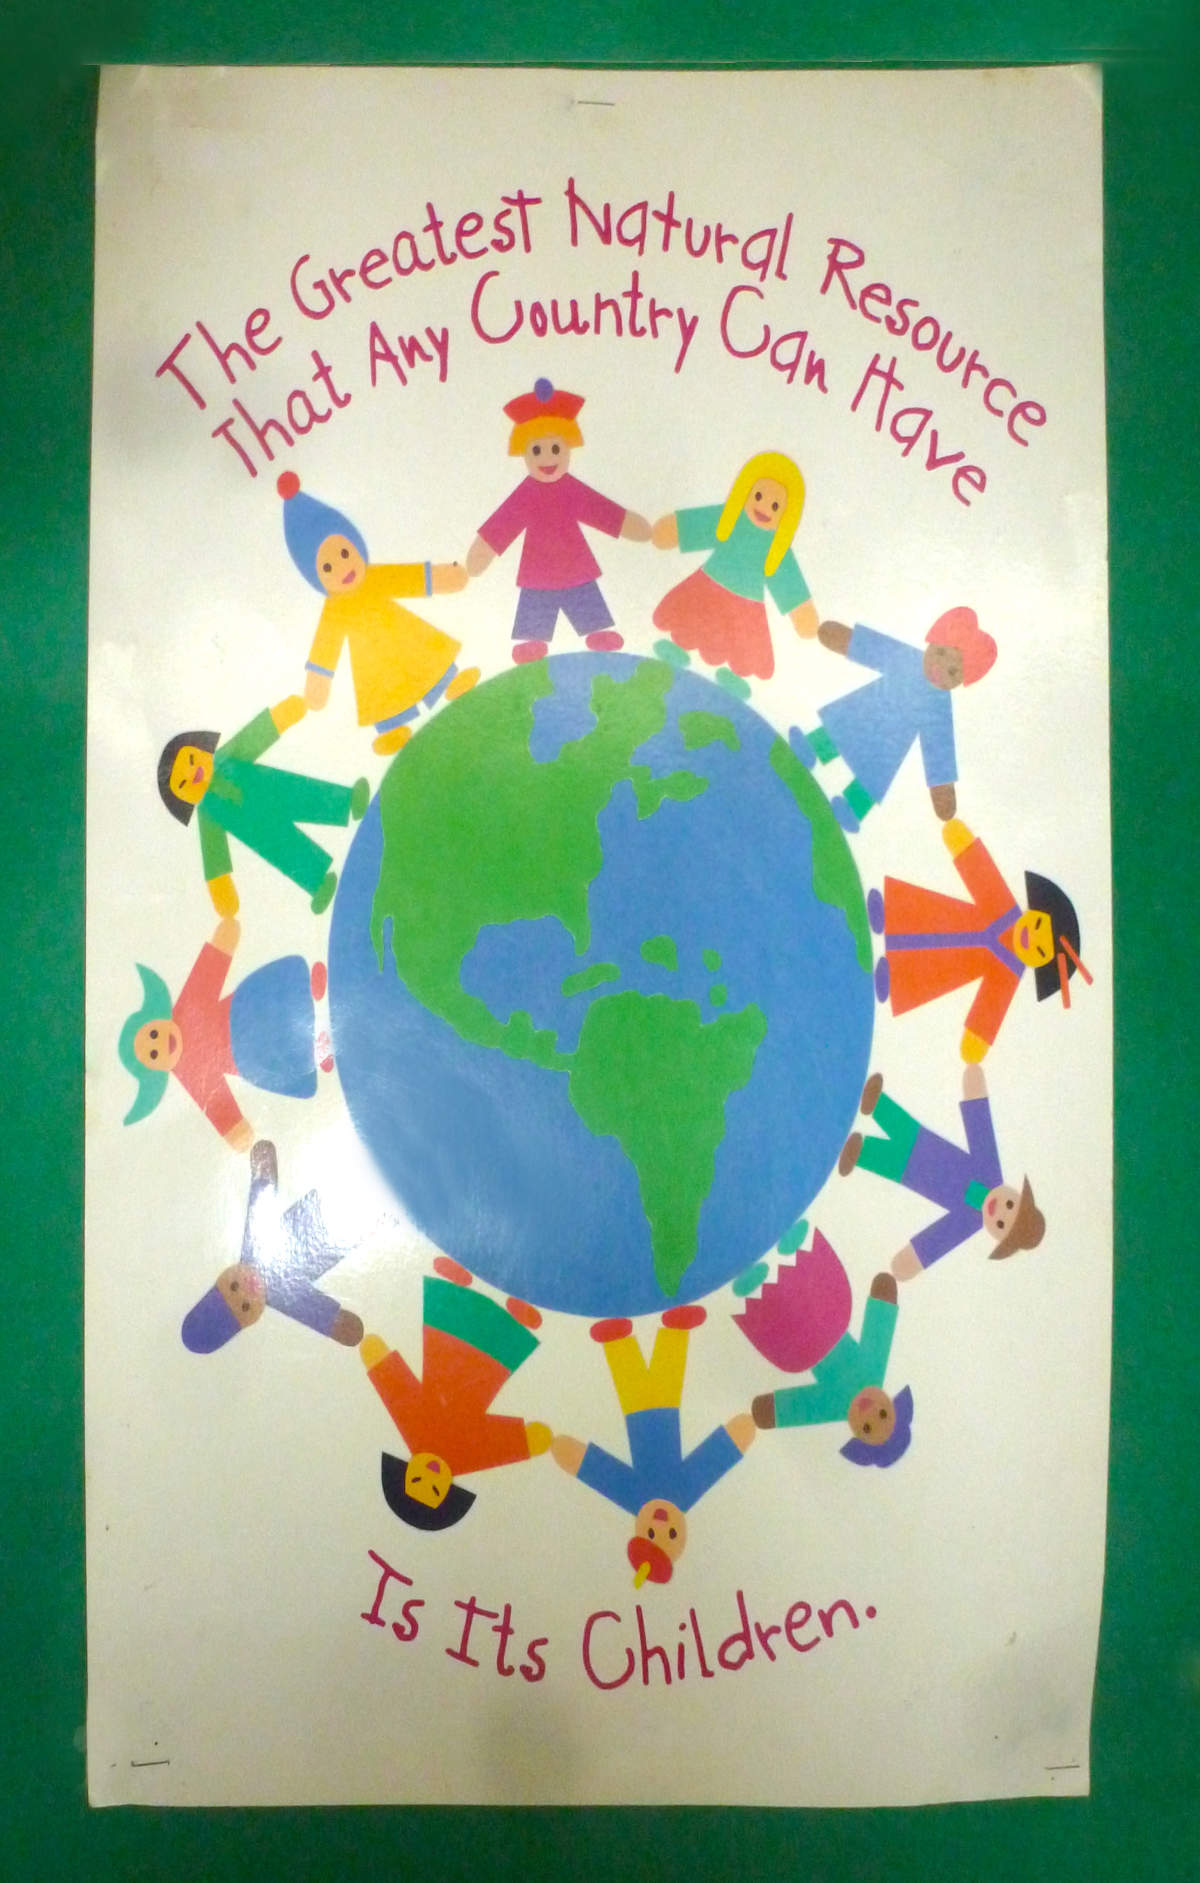 "Care of the Earth" Poster